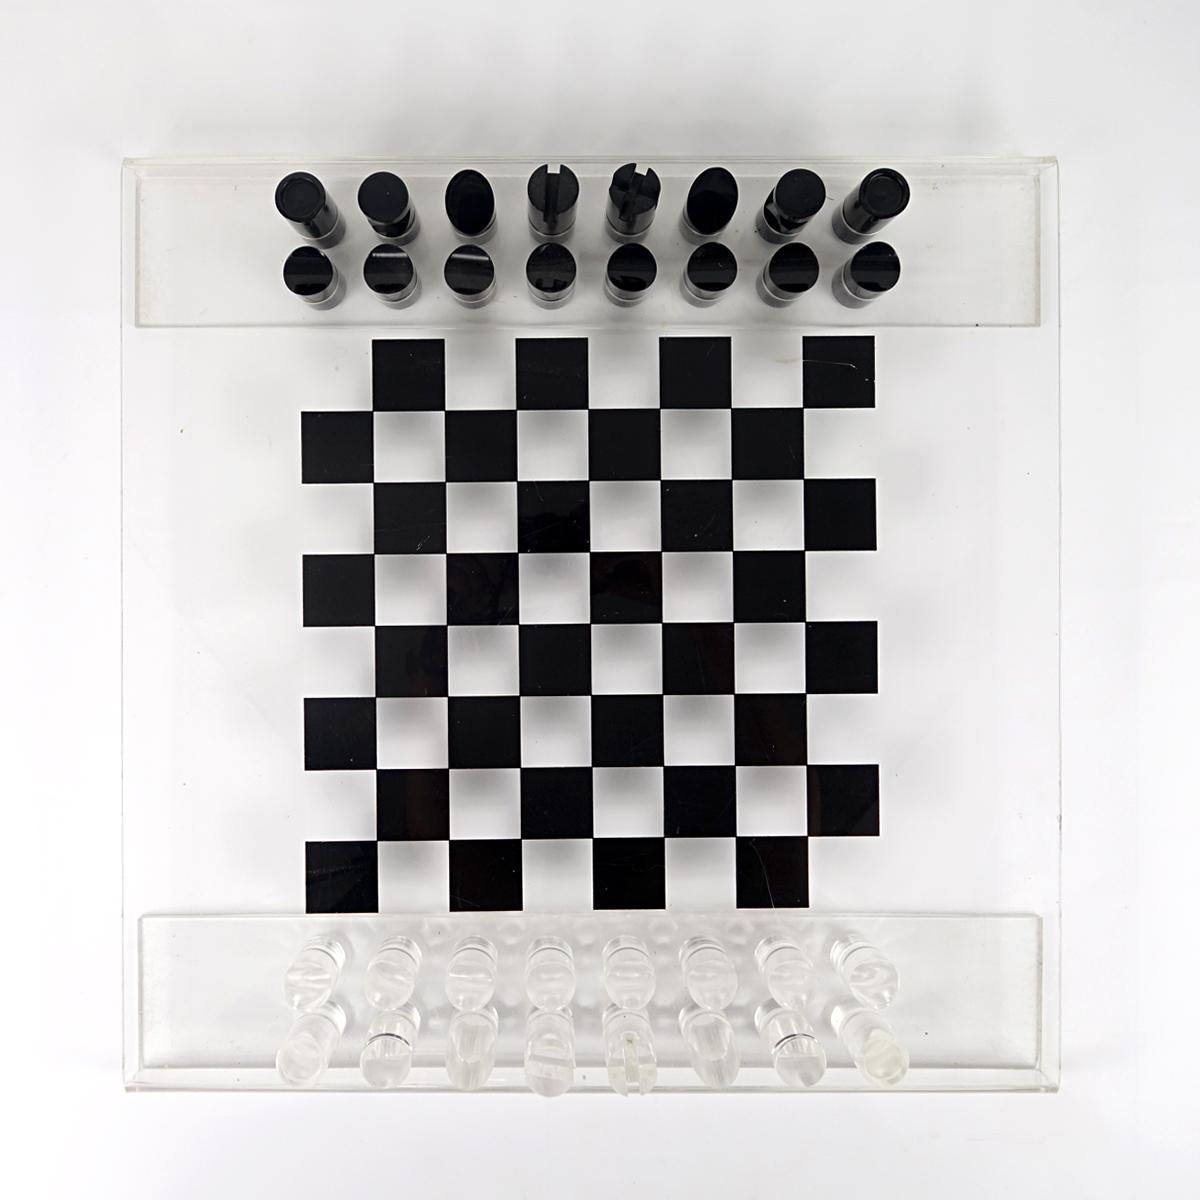 Very stylish chess board and game pieces made of Lucite.
The board has been elegantly folded on its edges giving it a nice height.
The board has a few surface scratches and the pieces have a little crazing due to age and use.